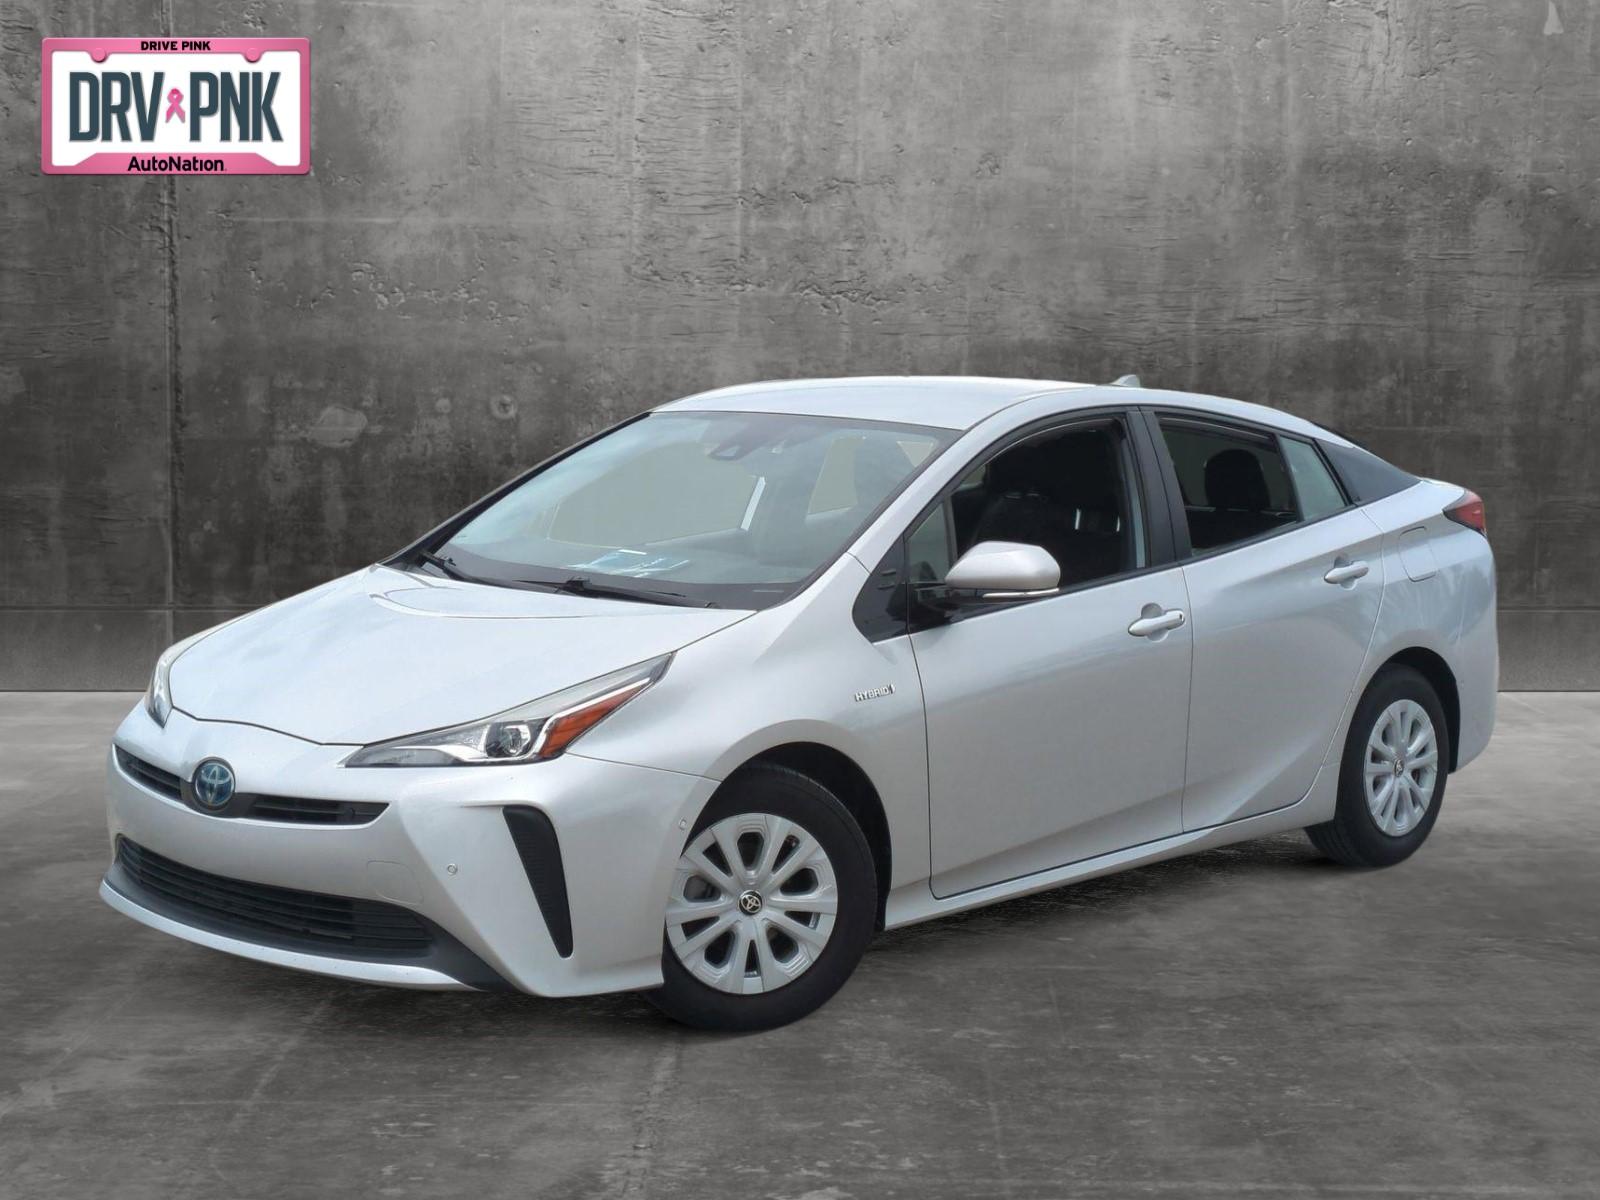 2019 Toyota Prius Vehicle Photo in Ft. Myers, FL 33907